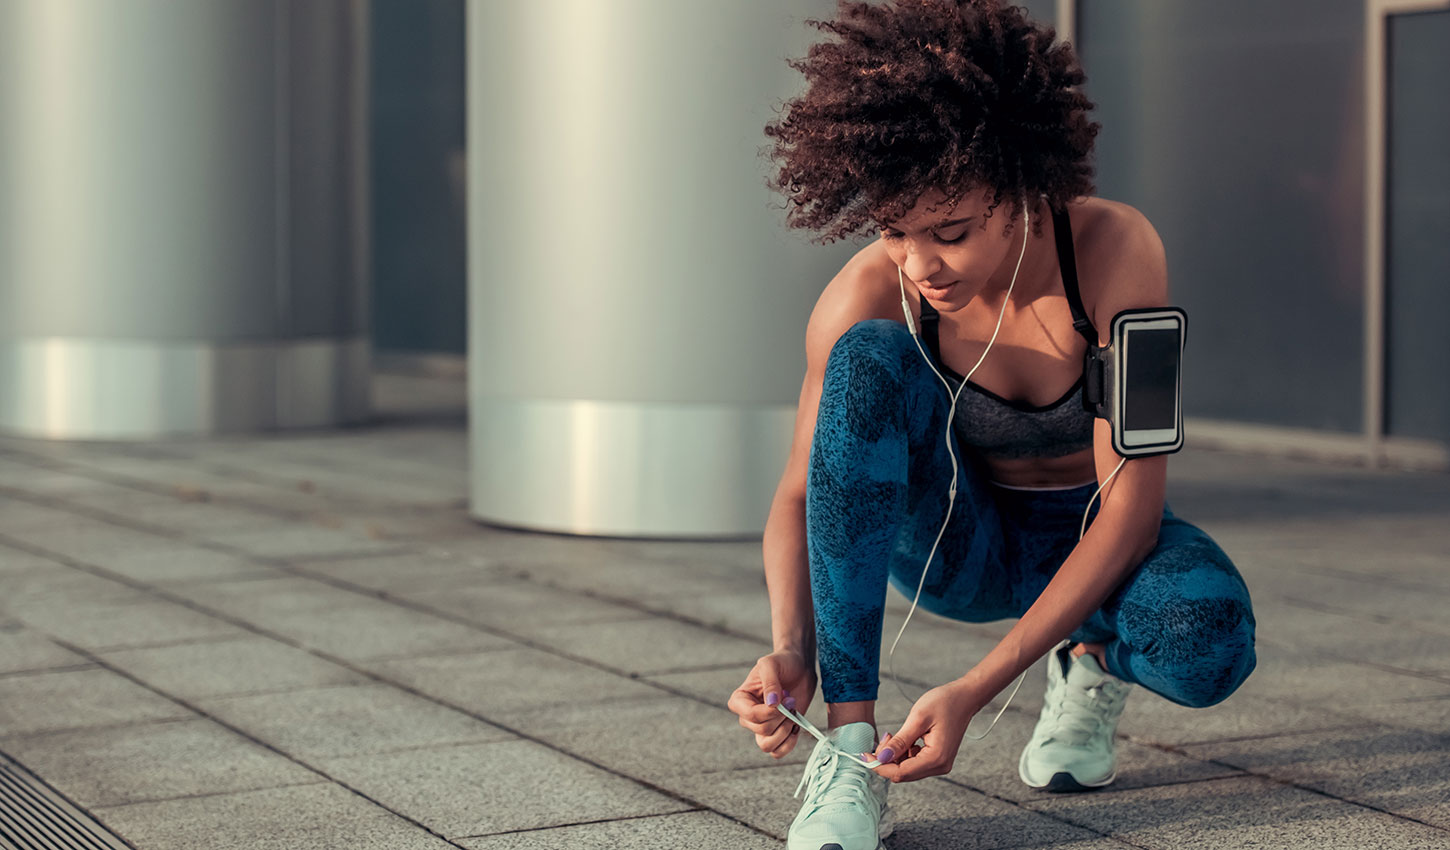 Health & Fitness Mobile App Revenue Jumped 70% Year-Over-Year in Europe to a Record $544 Million in 2020 main image feature